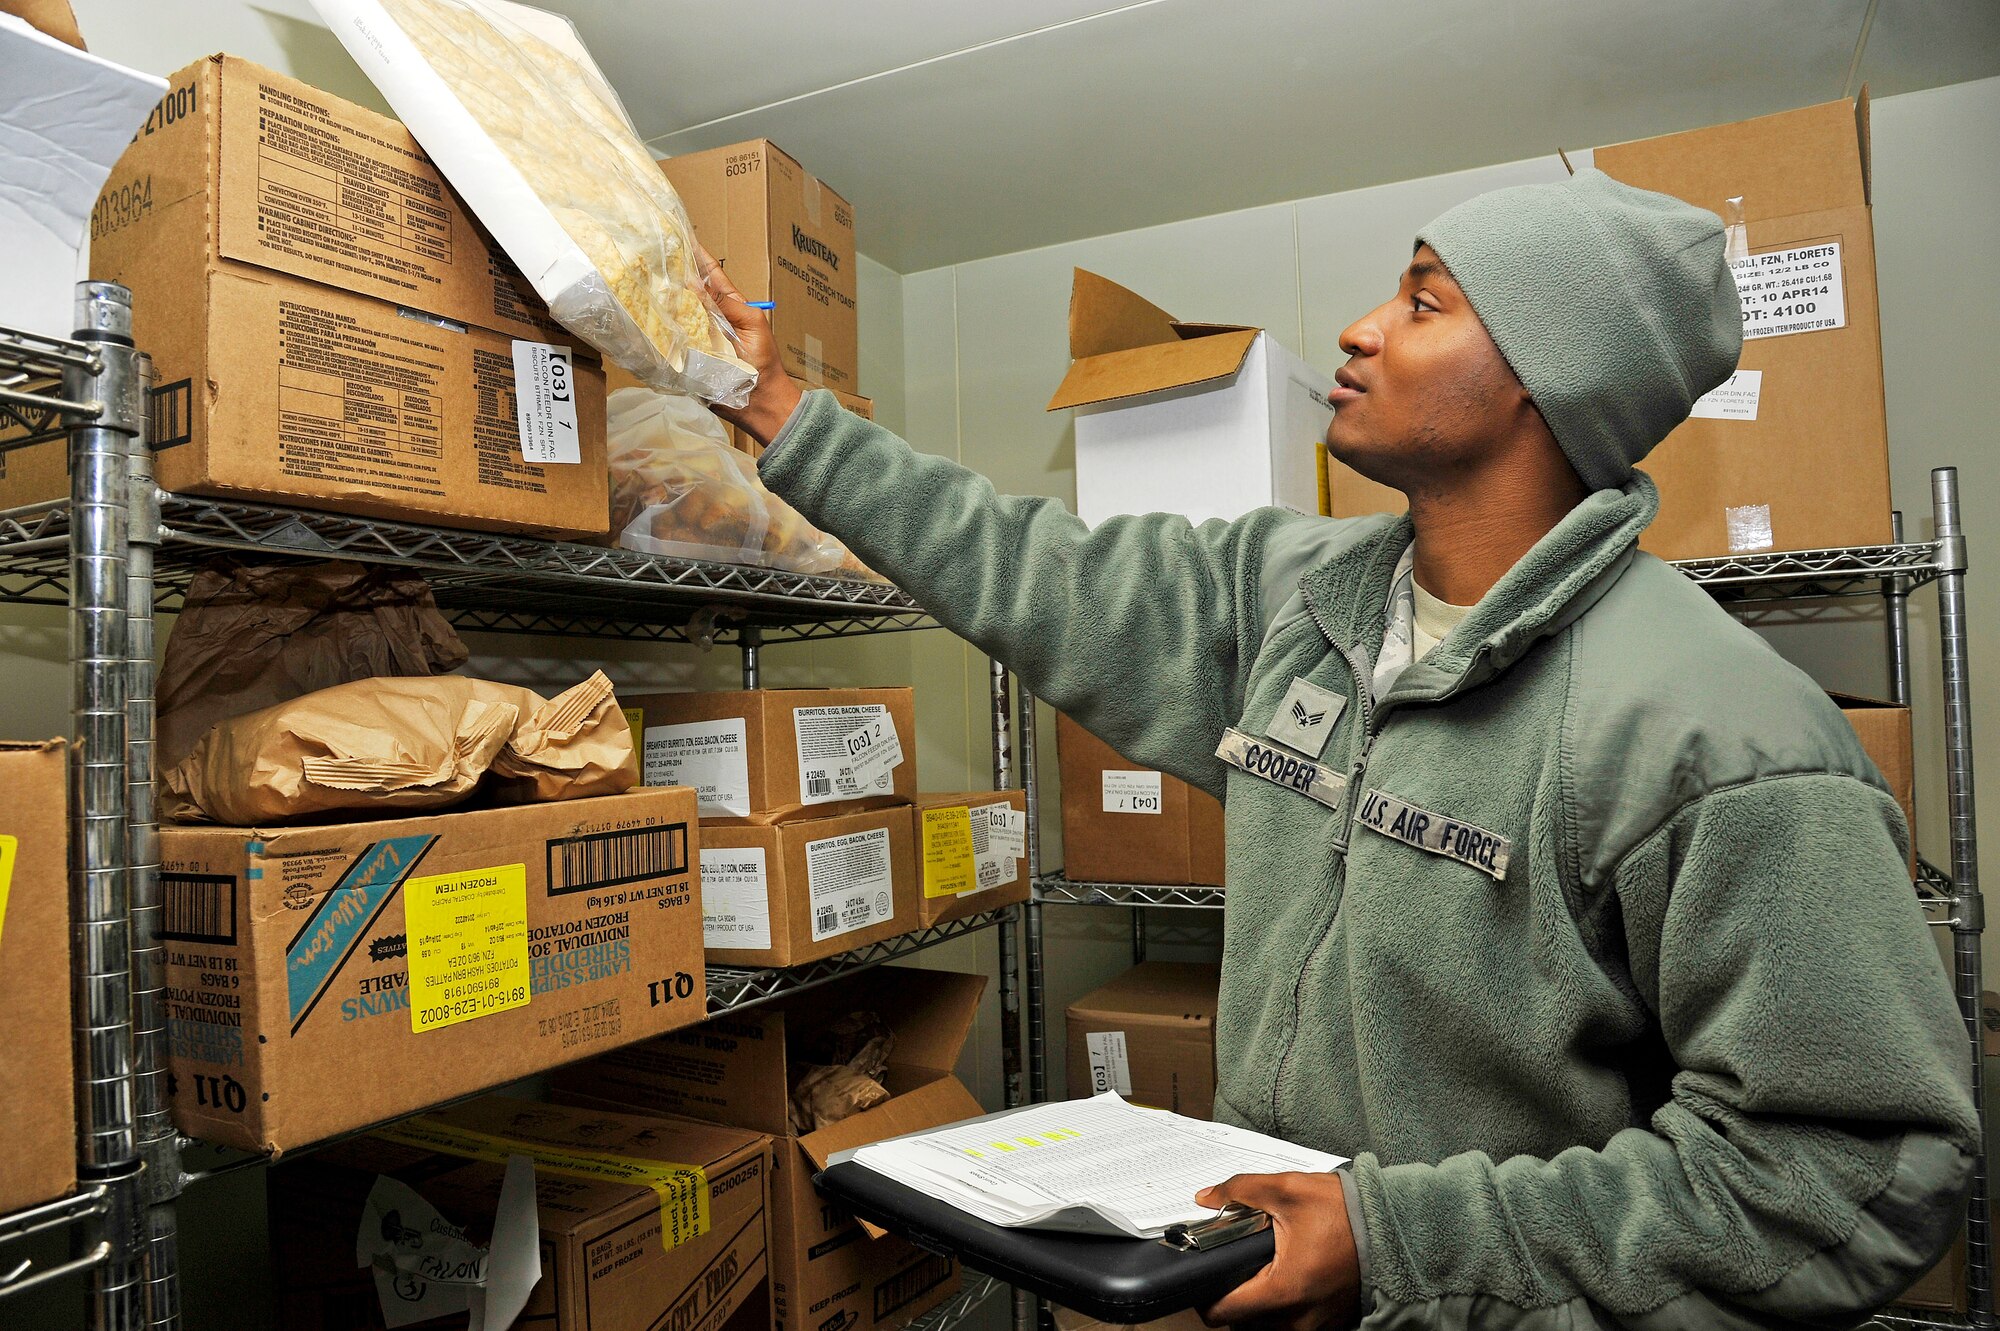 U.S. Air Force Senior Airman DeQuinn Cooper, 35th Force Support Squadron Falcon Feeder store room manager, performs an inventory check at Misawa Air Base, Japan, Oct. 1, 2014. During this process, Cooper individually accounts for each item and enters it into a database for proper record keeping. (U.S. Air Force photo by Airman 1st Class Patrick S. Ciccarone/Released)